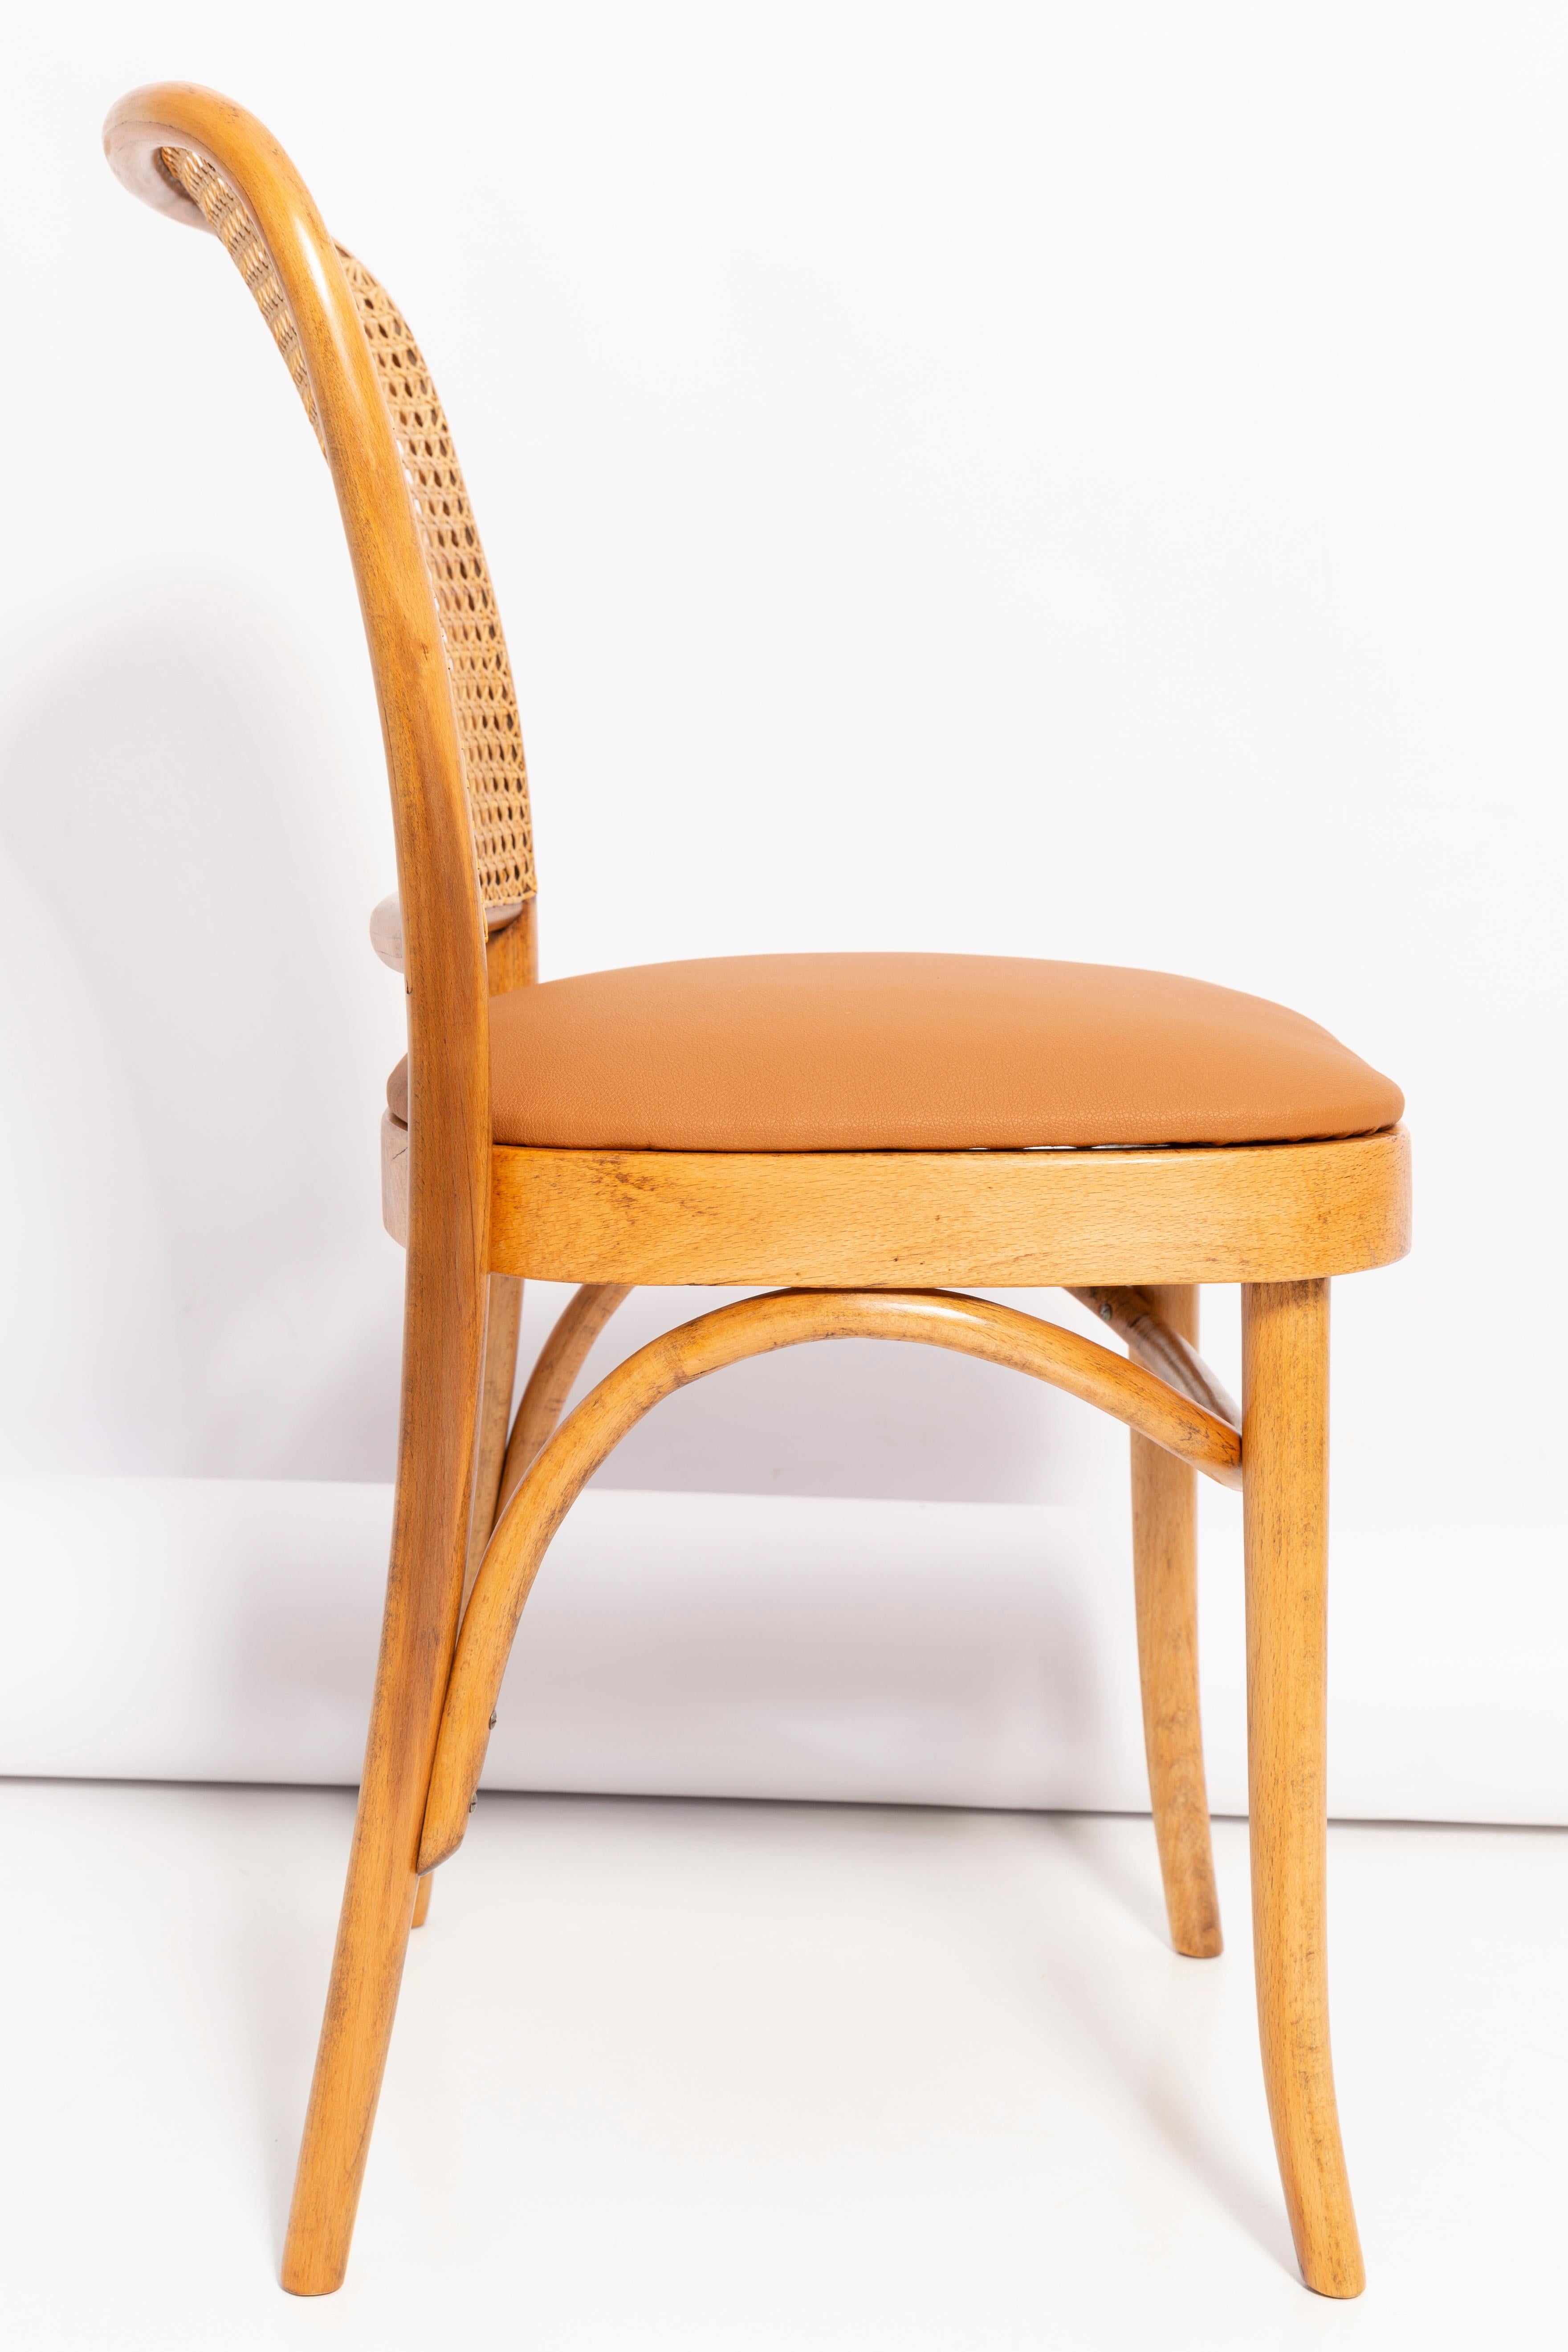 Hand-Carved Camel Faux Leather Thonet Wood Rattan Chair, 1960s For Sale